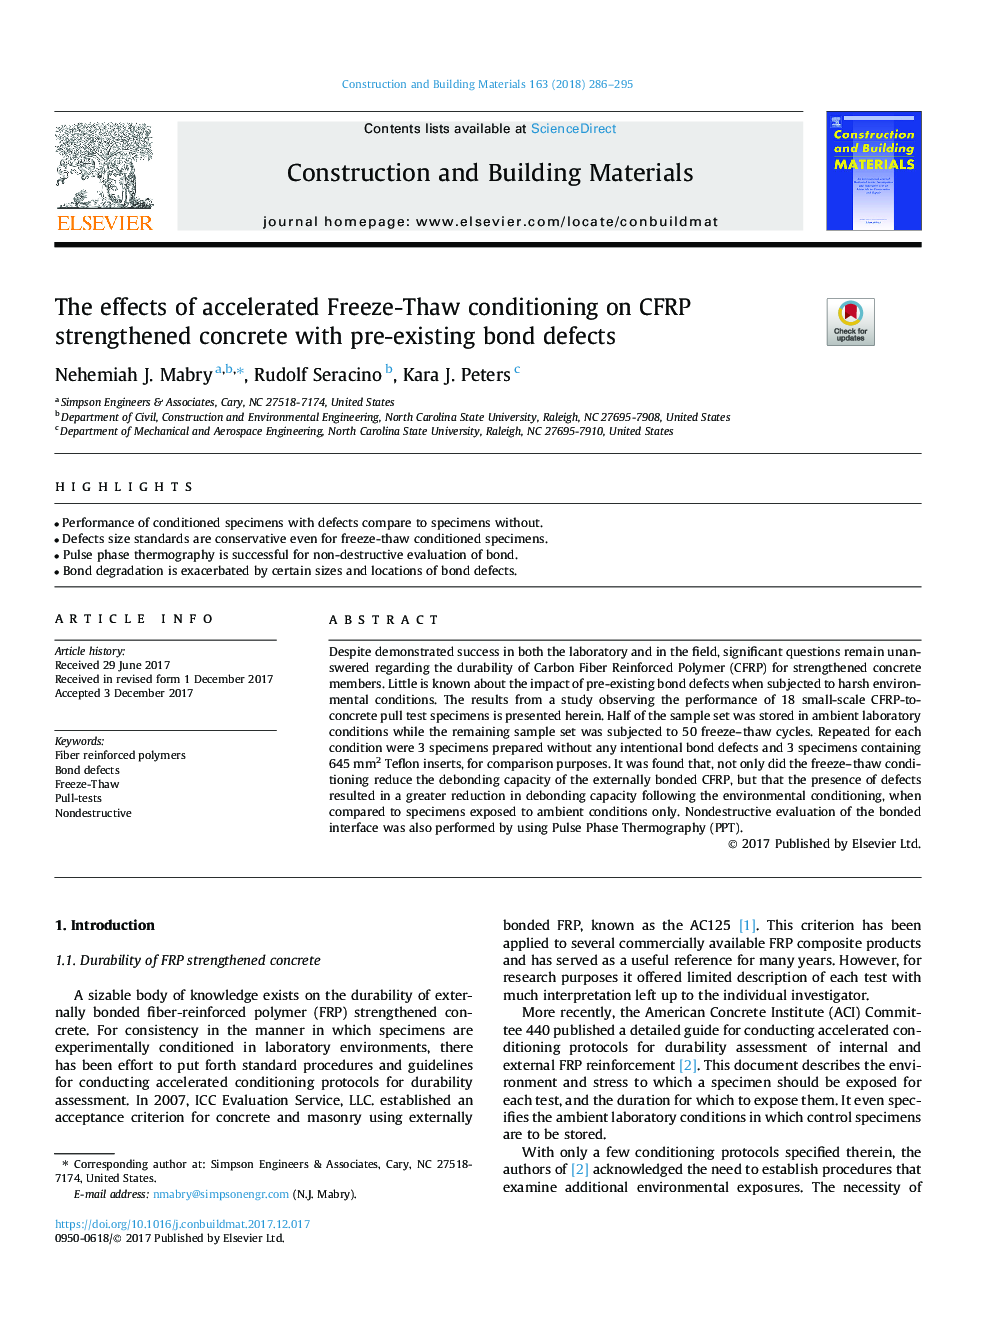 The effects of accelerated Freeze-Thaw conditioning on CFRP strengthened concrete with pre-existing bond defects